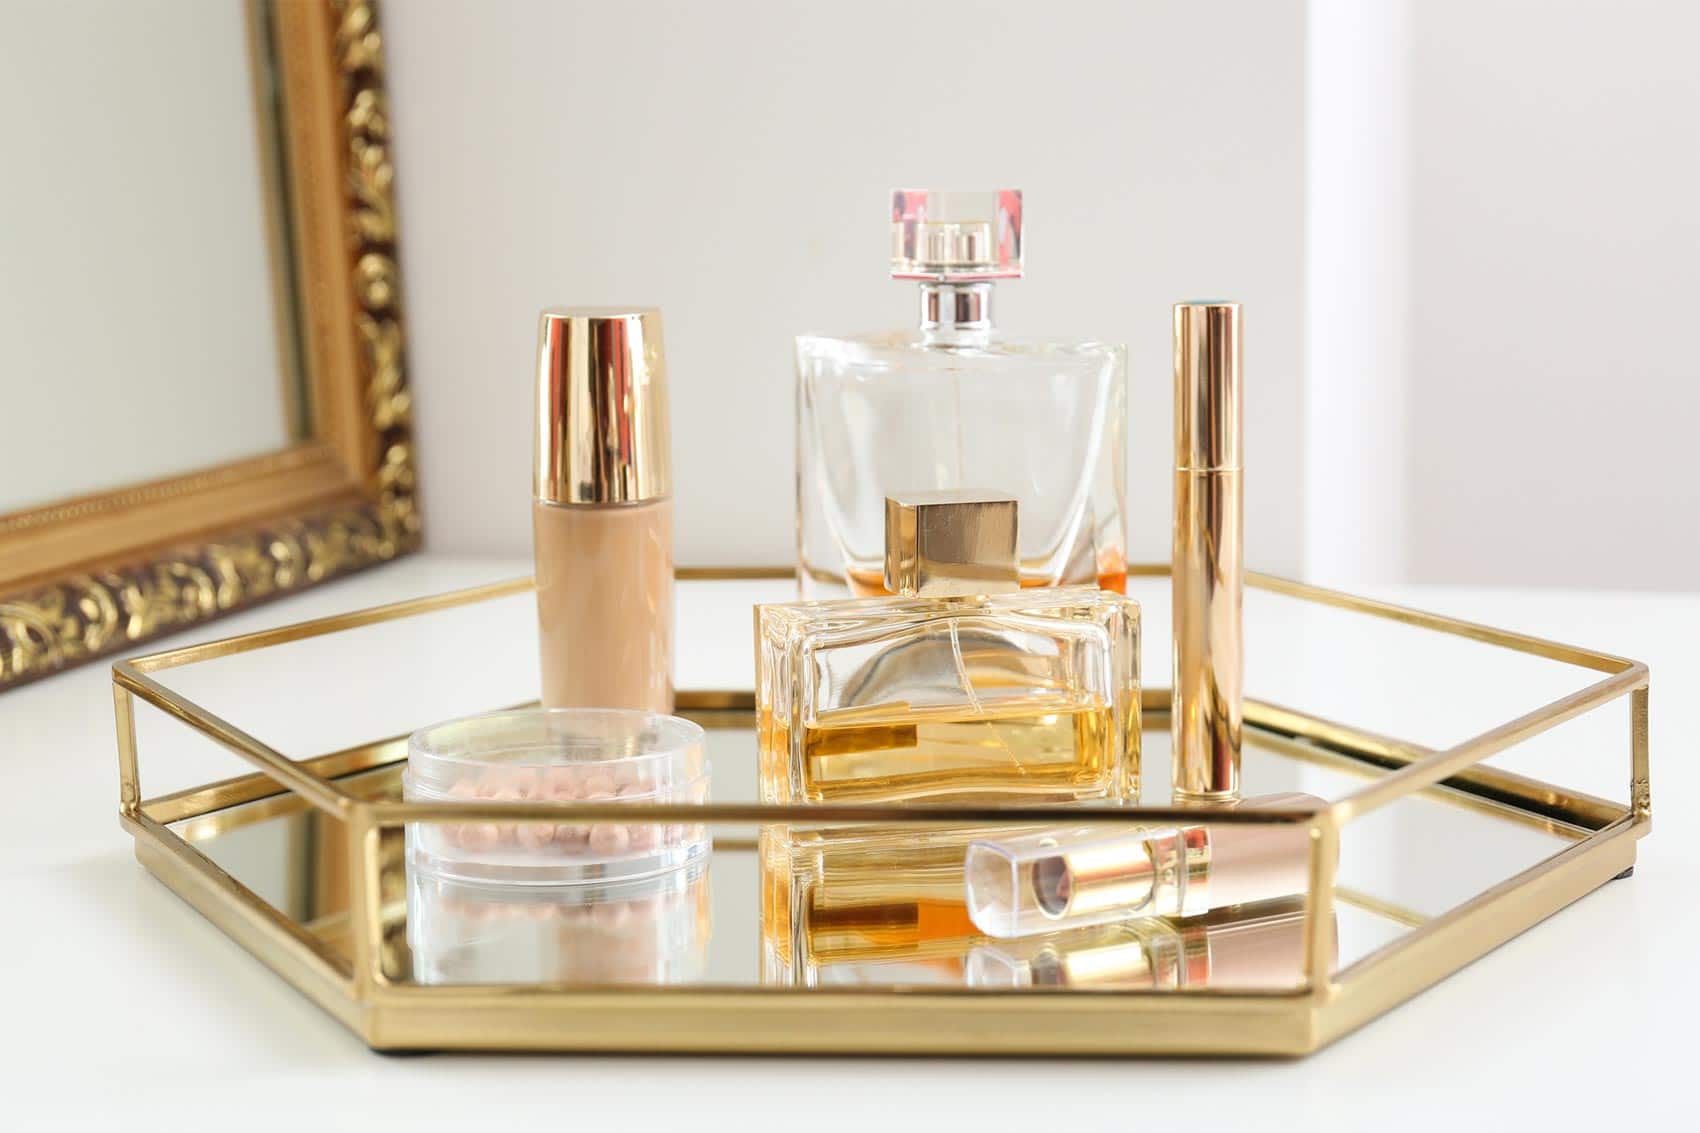 How To Display Perfume On A Dresser